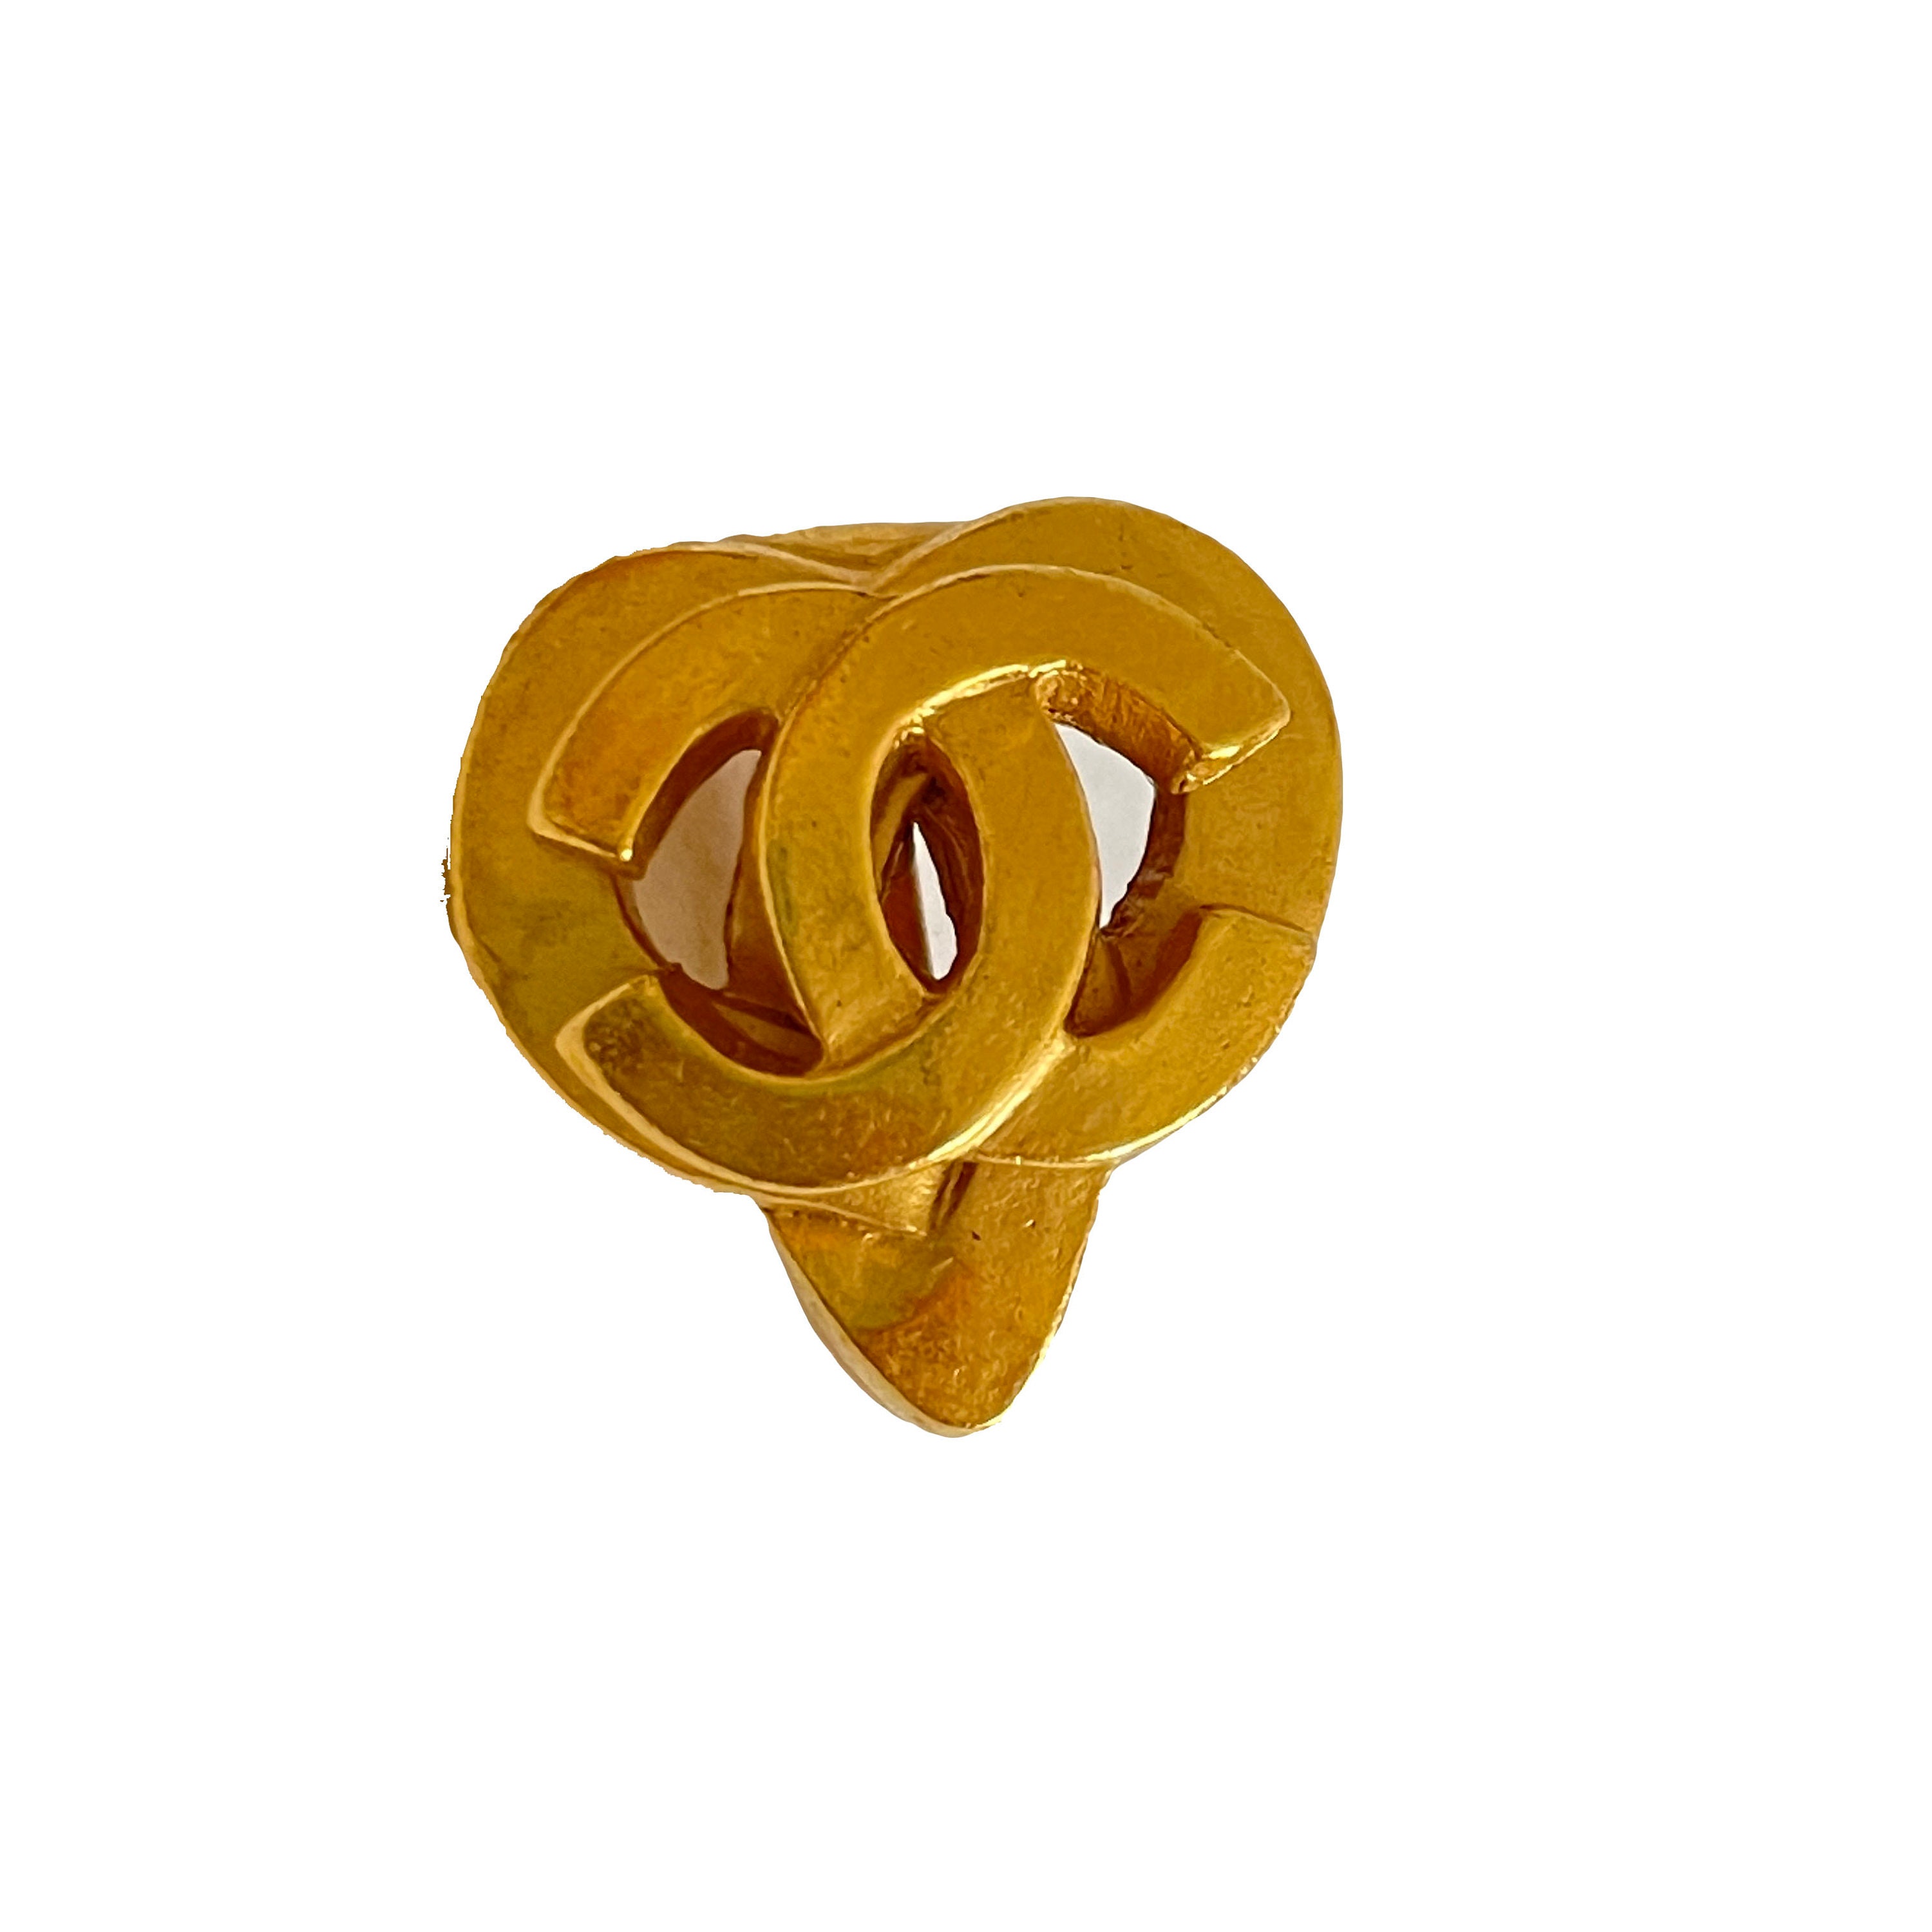 MyStyle, A Chanel Vintage Brooch